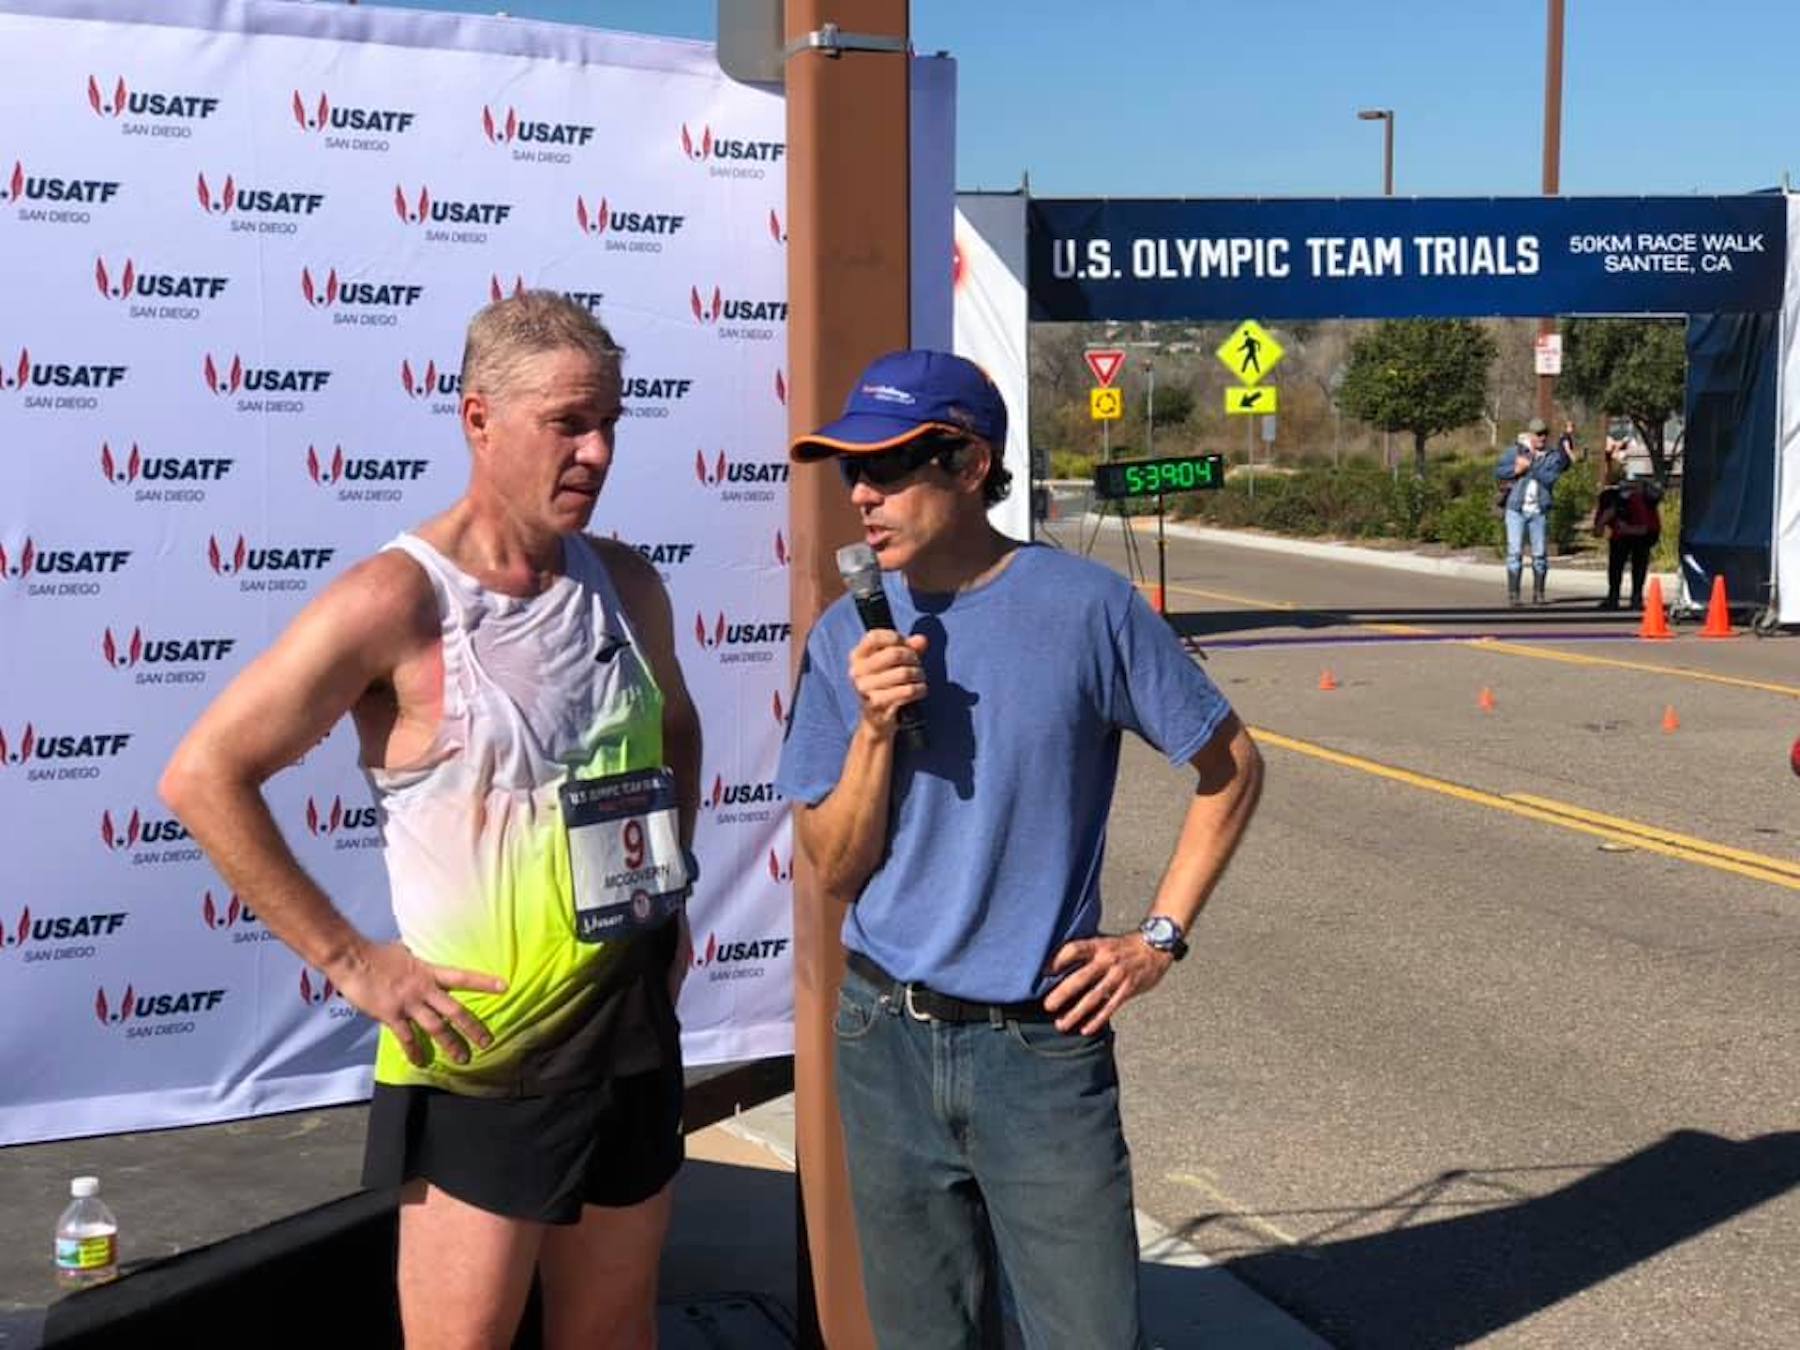 Dave McGovern after his olast Olympic trials for the race walk.